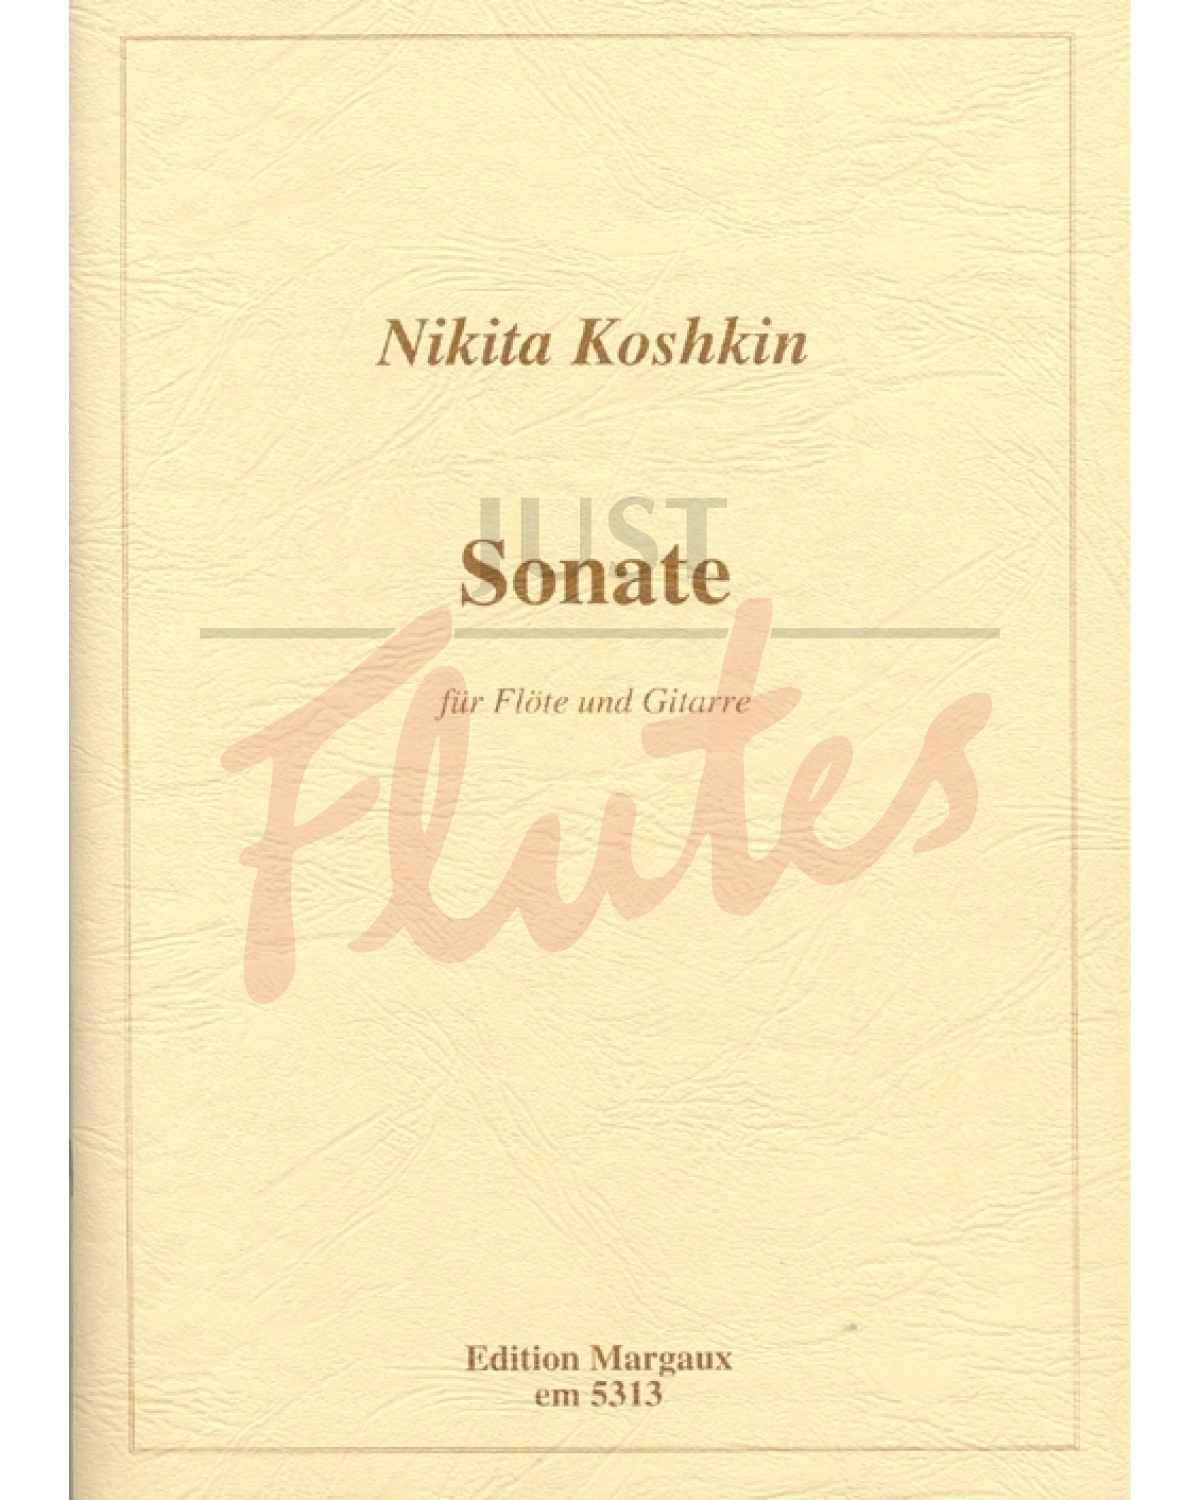 Sonata for Flute and Guitar